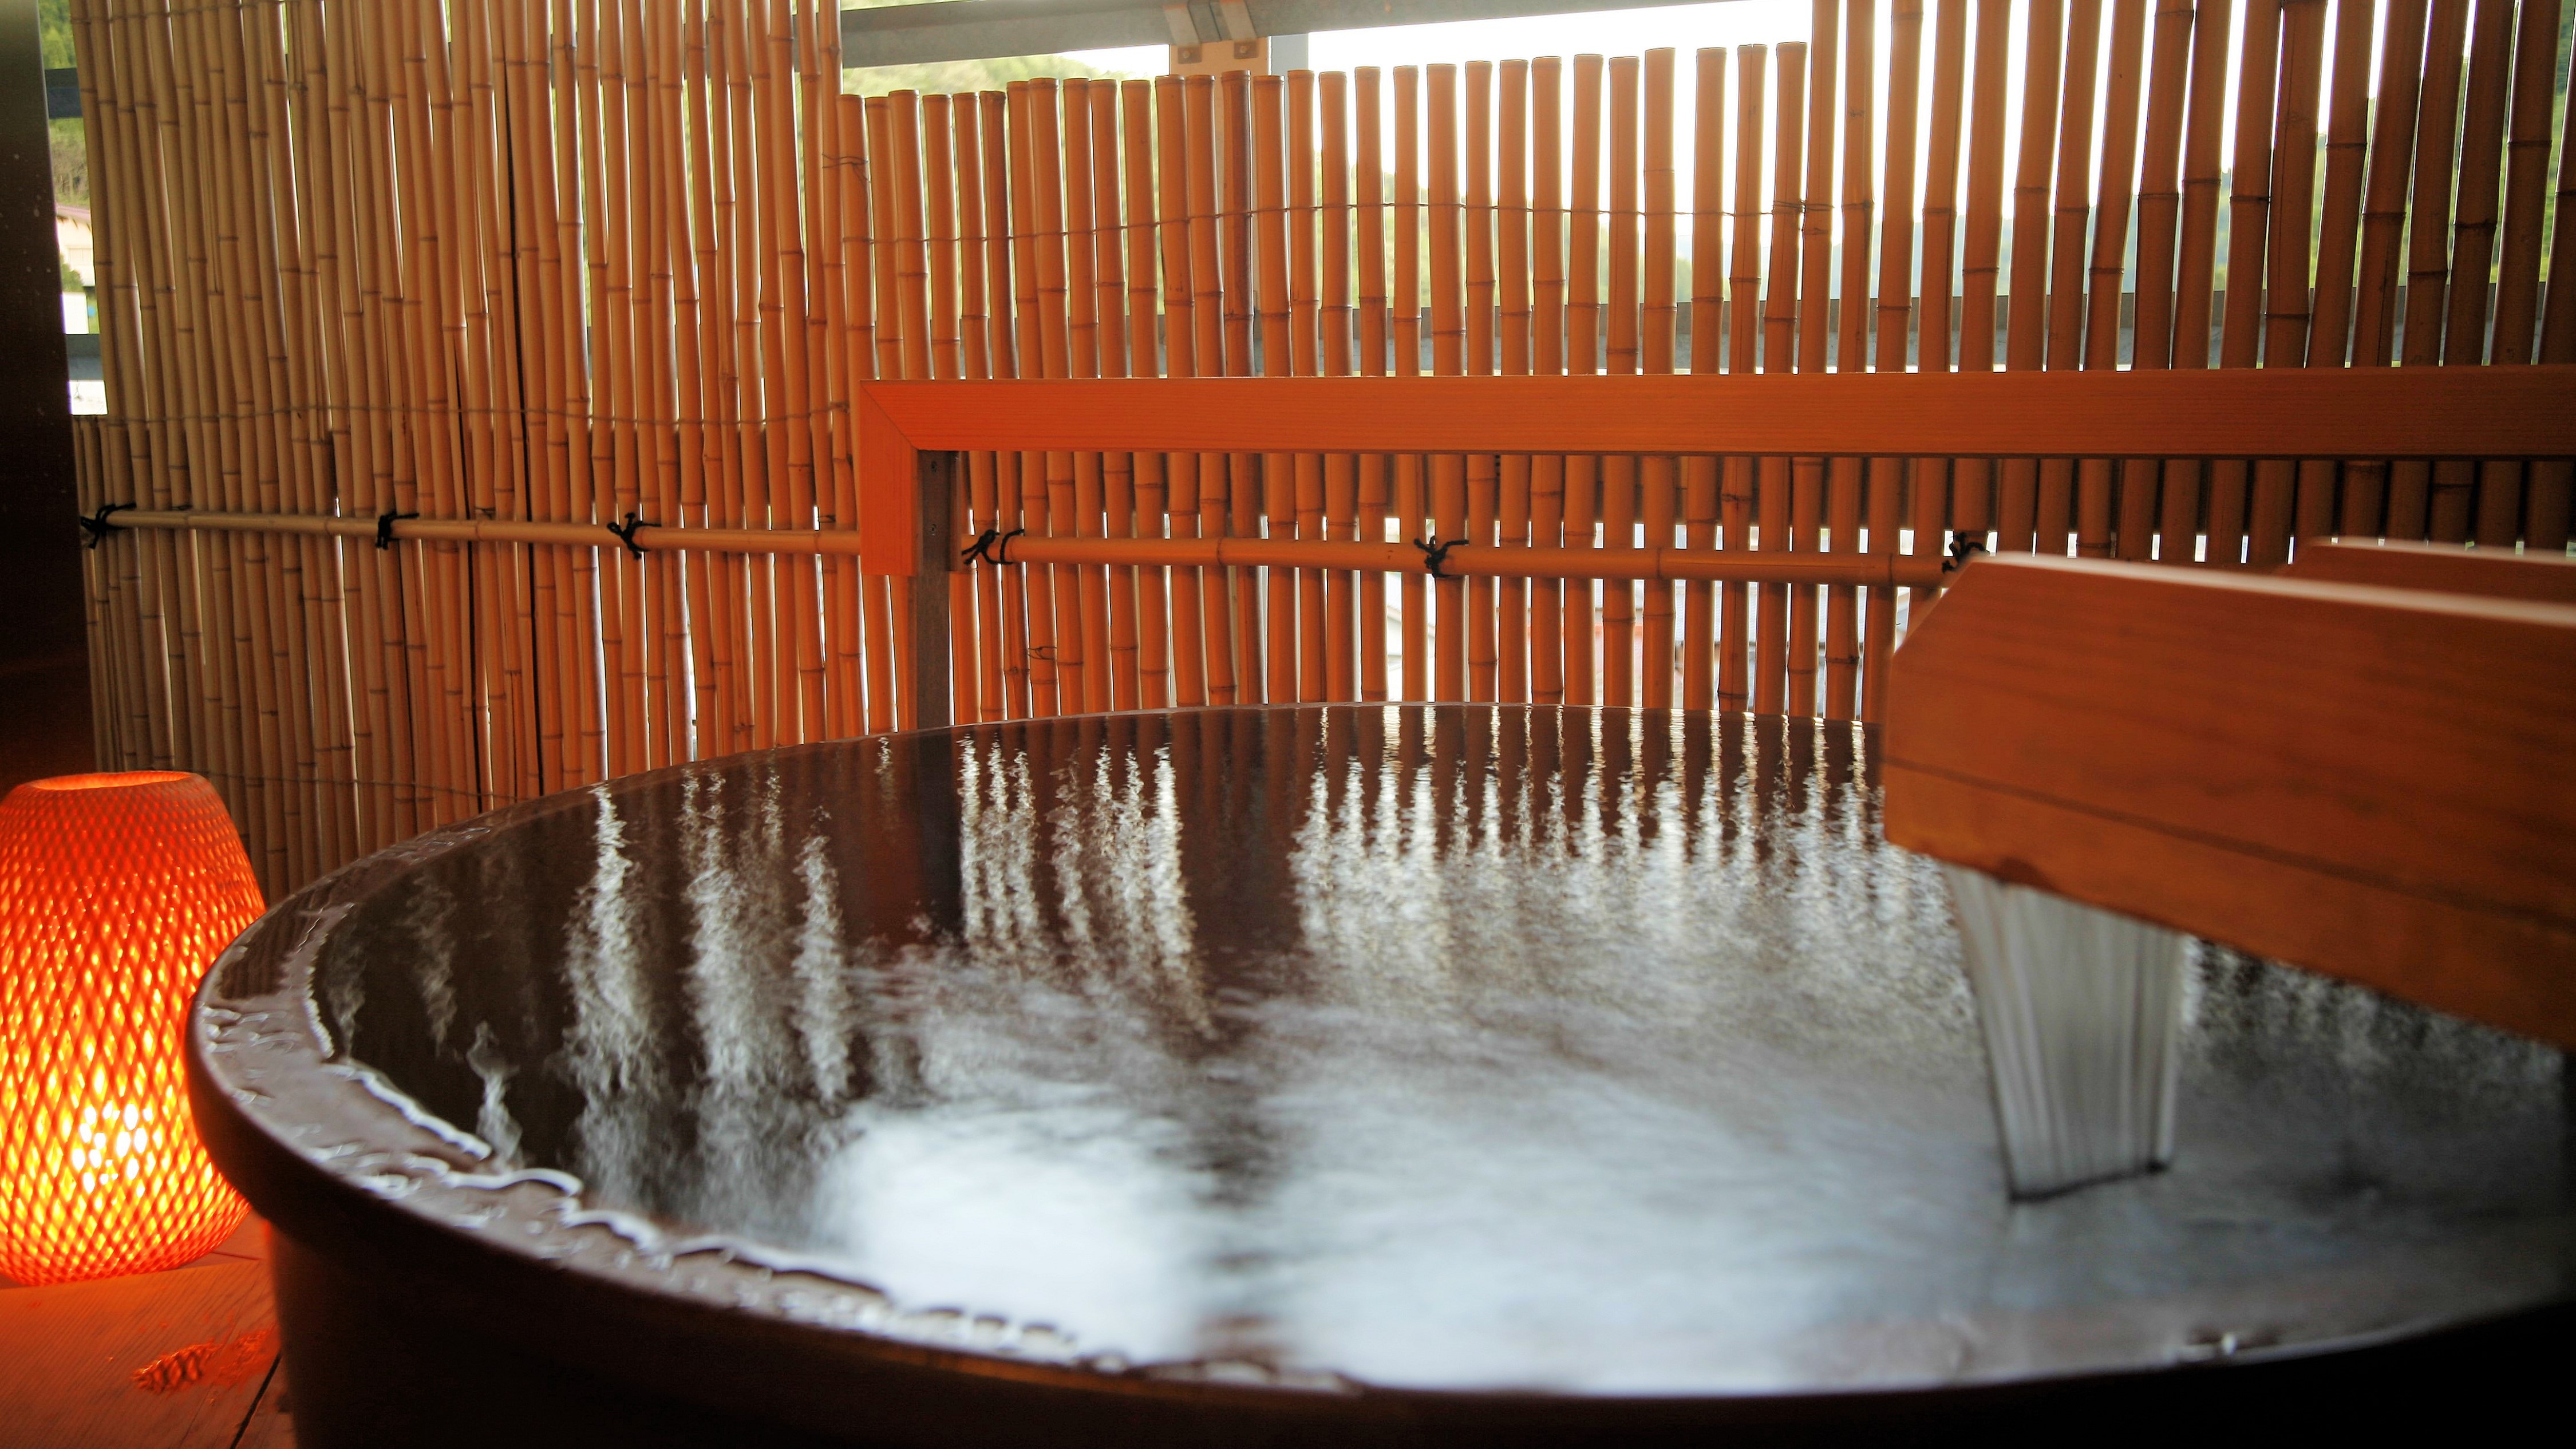 Japanese-Western style room with hot spring open-air bath [Suou 207]